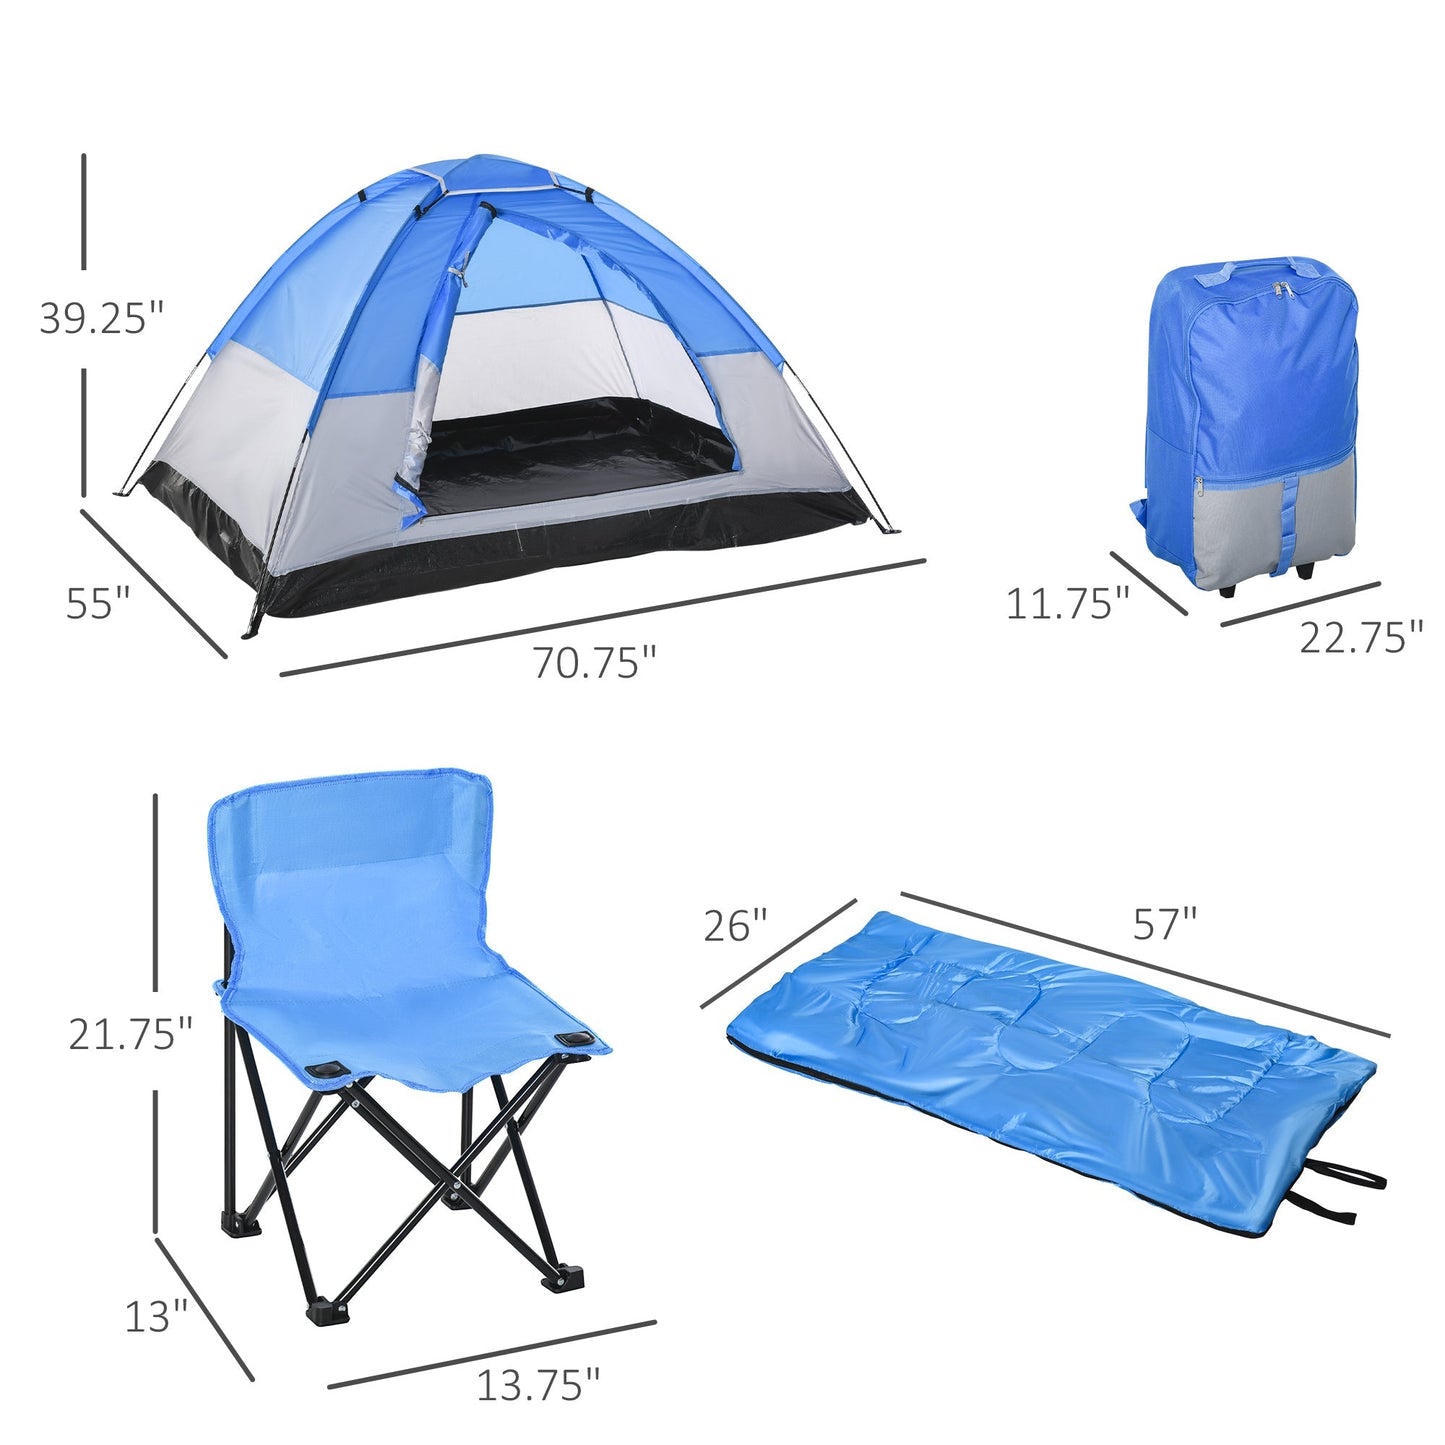 2 Kids Pop Up Camping Tents, Playhouse for Boys Girls with Chairs, Sleeping Bags, Flashlights, Trolley Case, Adventure, Outdoor at Gallery Canada